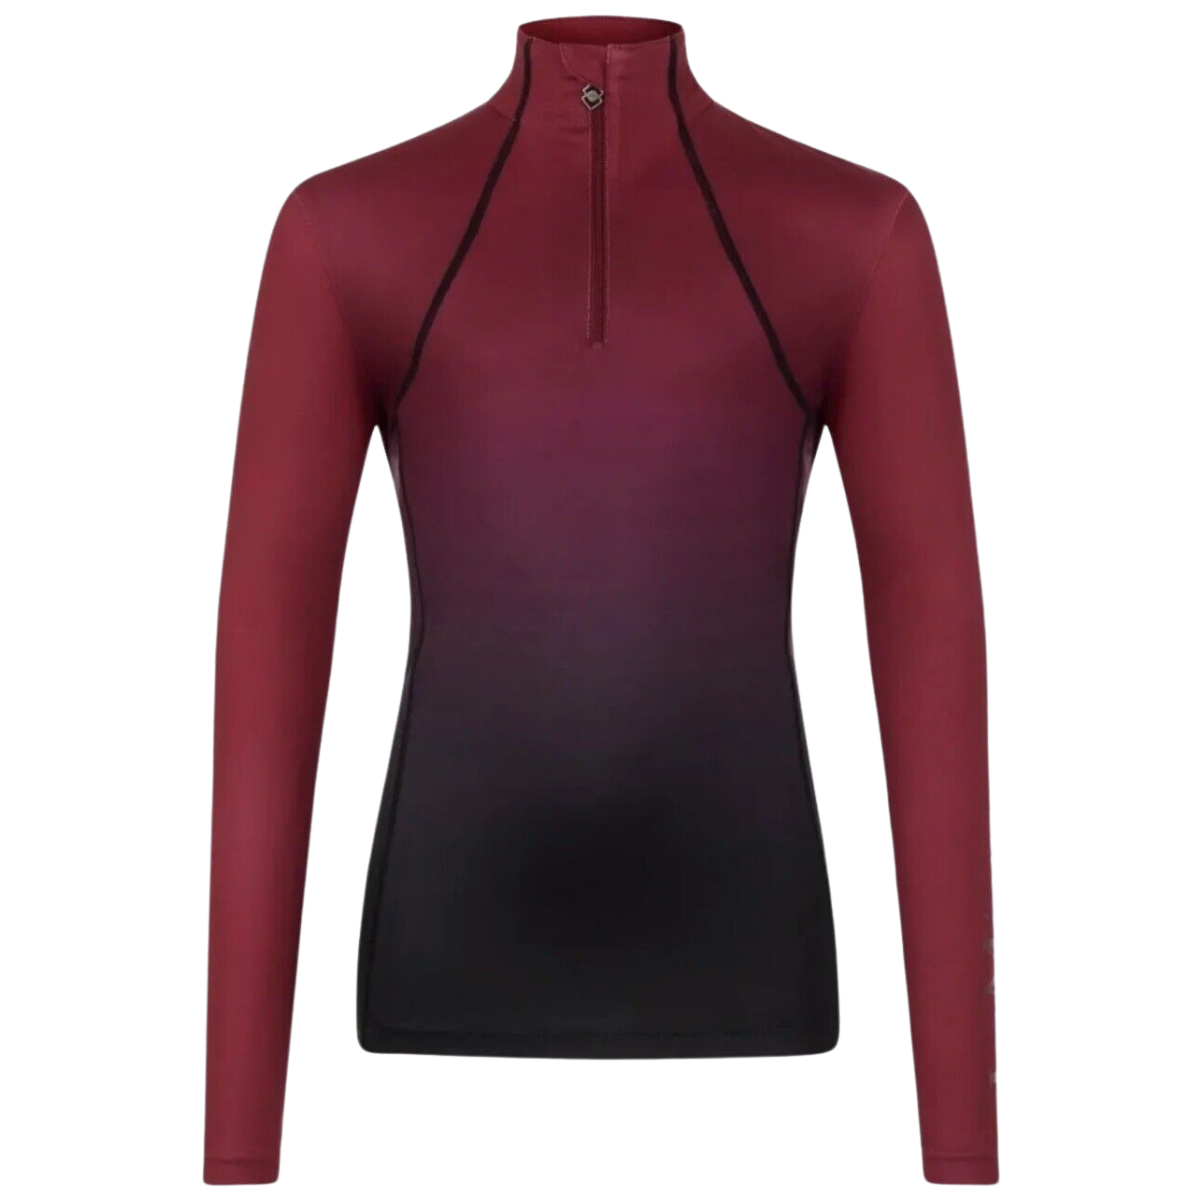 LeMieux 'Spectrum' Base Layer in Mulberry